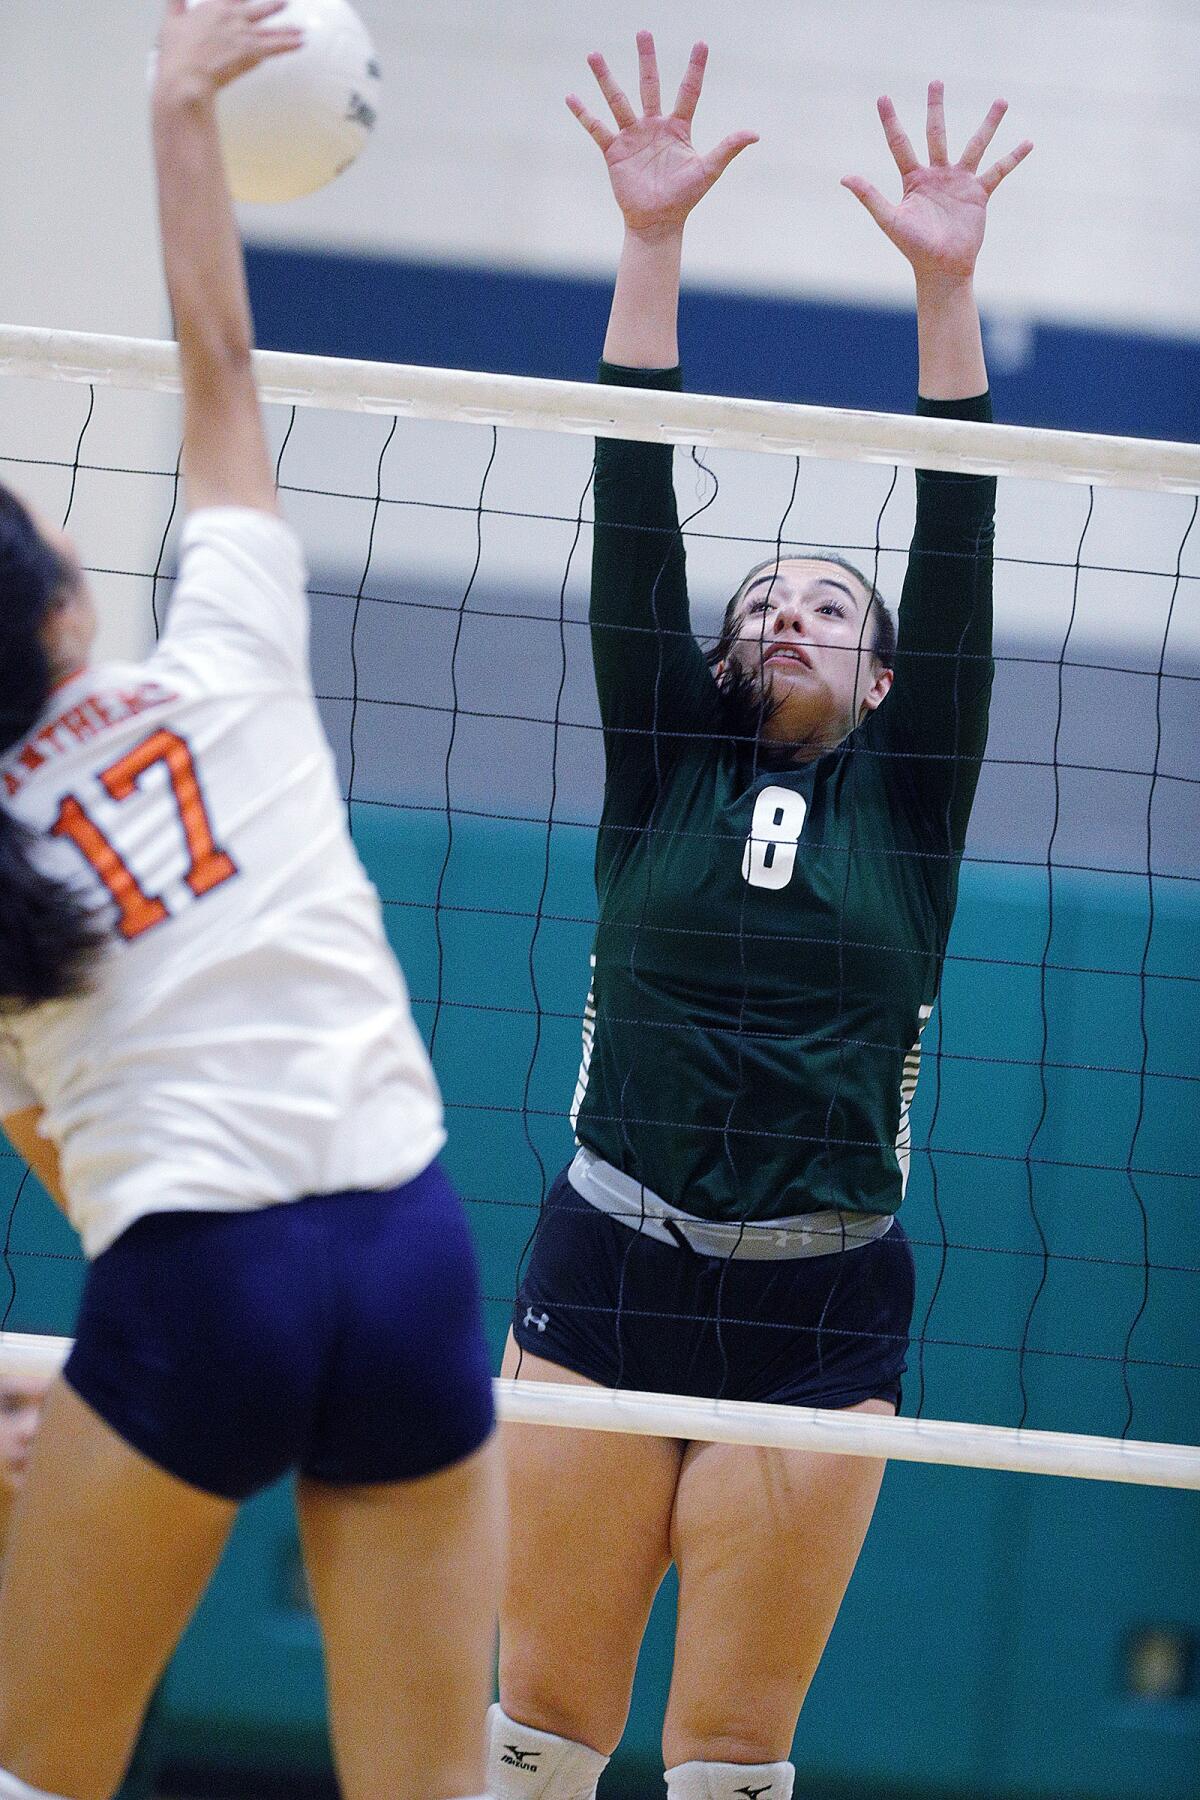 Providence's Liana Artunian reaches to block the kill by Polytechnic's Emily Wen in a Prep League girls' volleyball match at Providence High School on Tuesday, September 17, 2019.